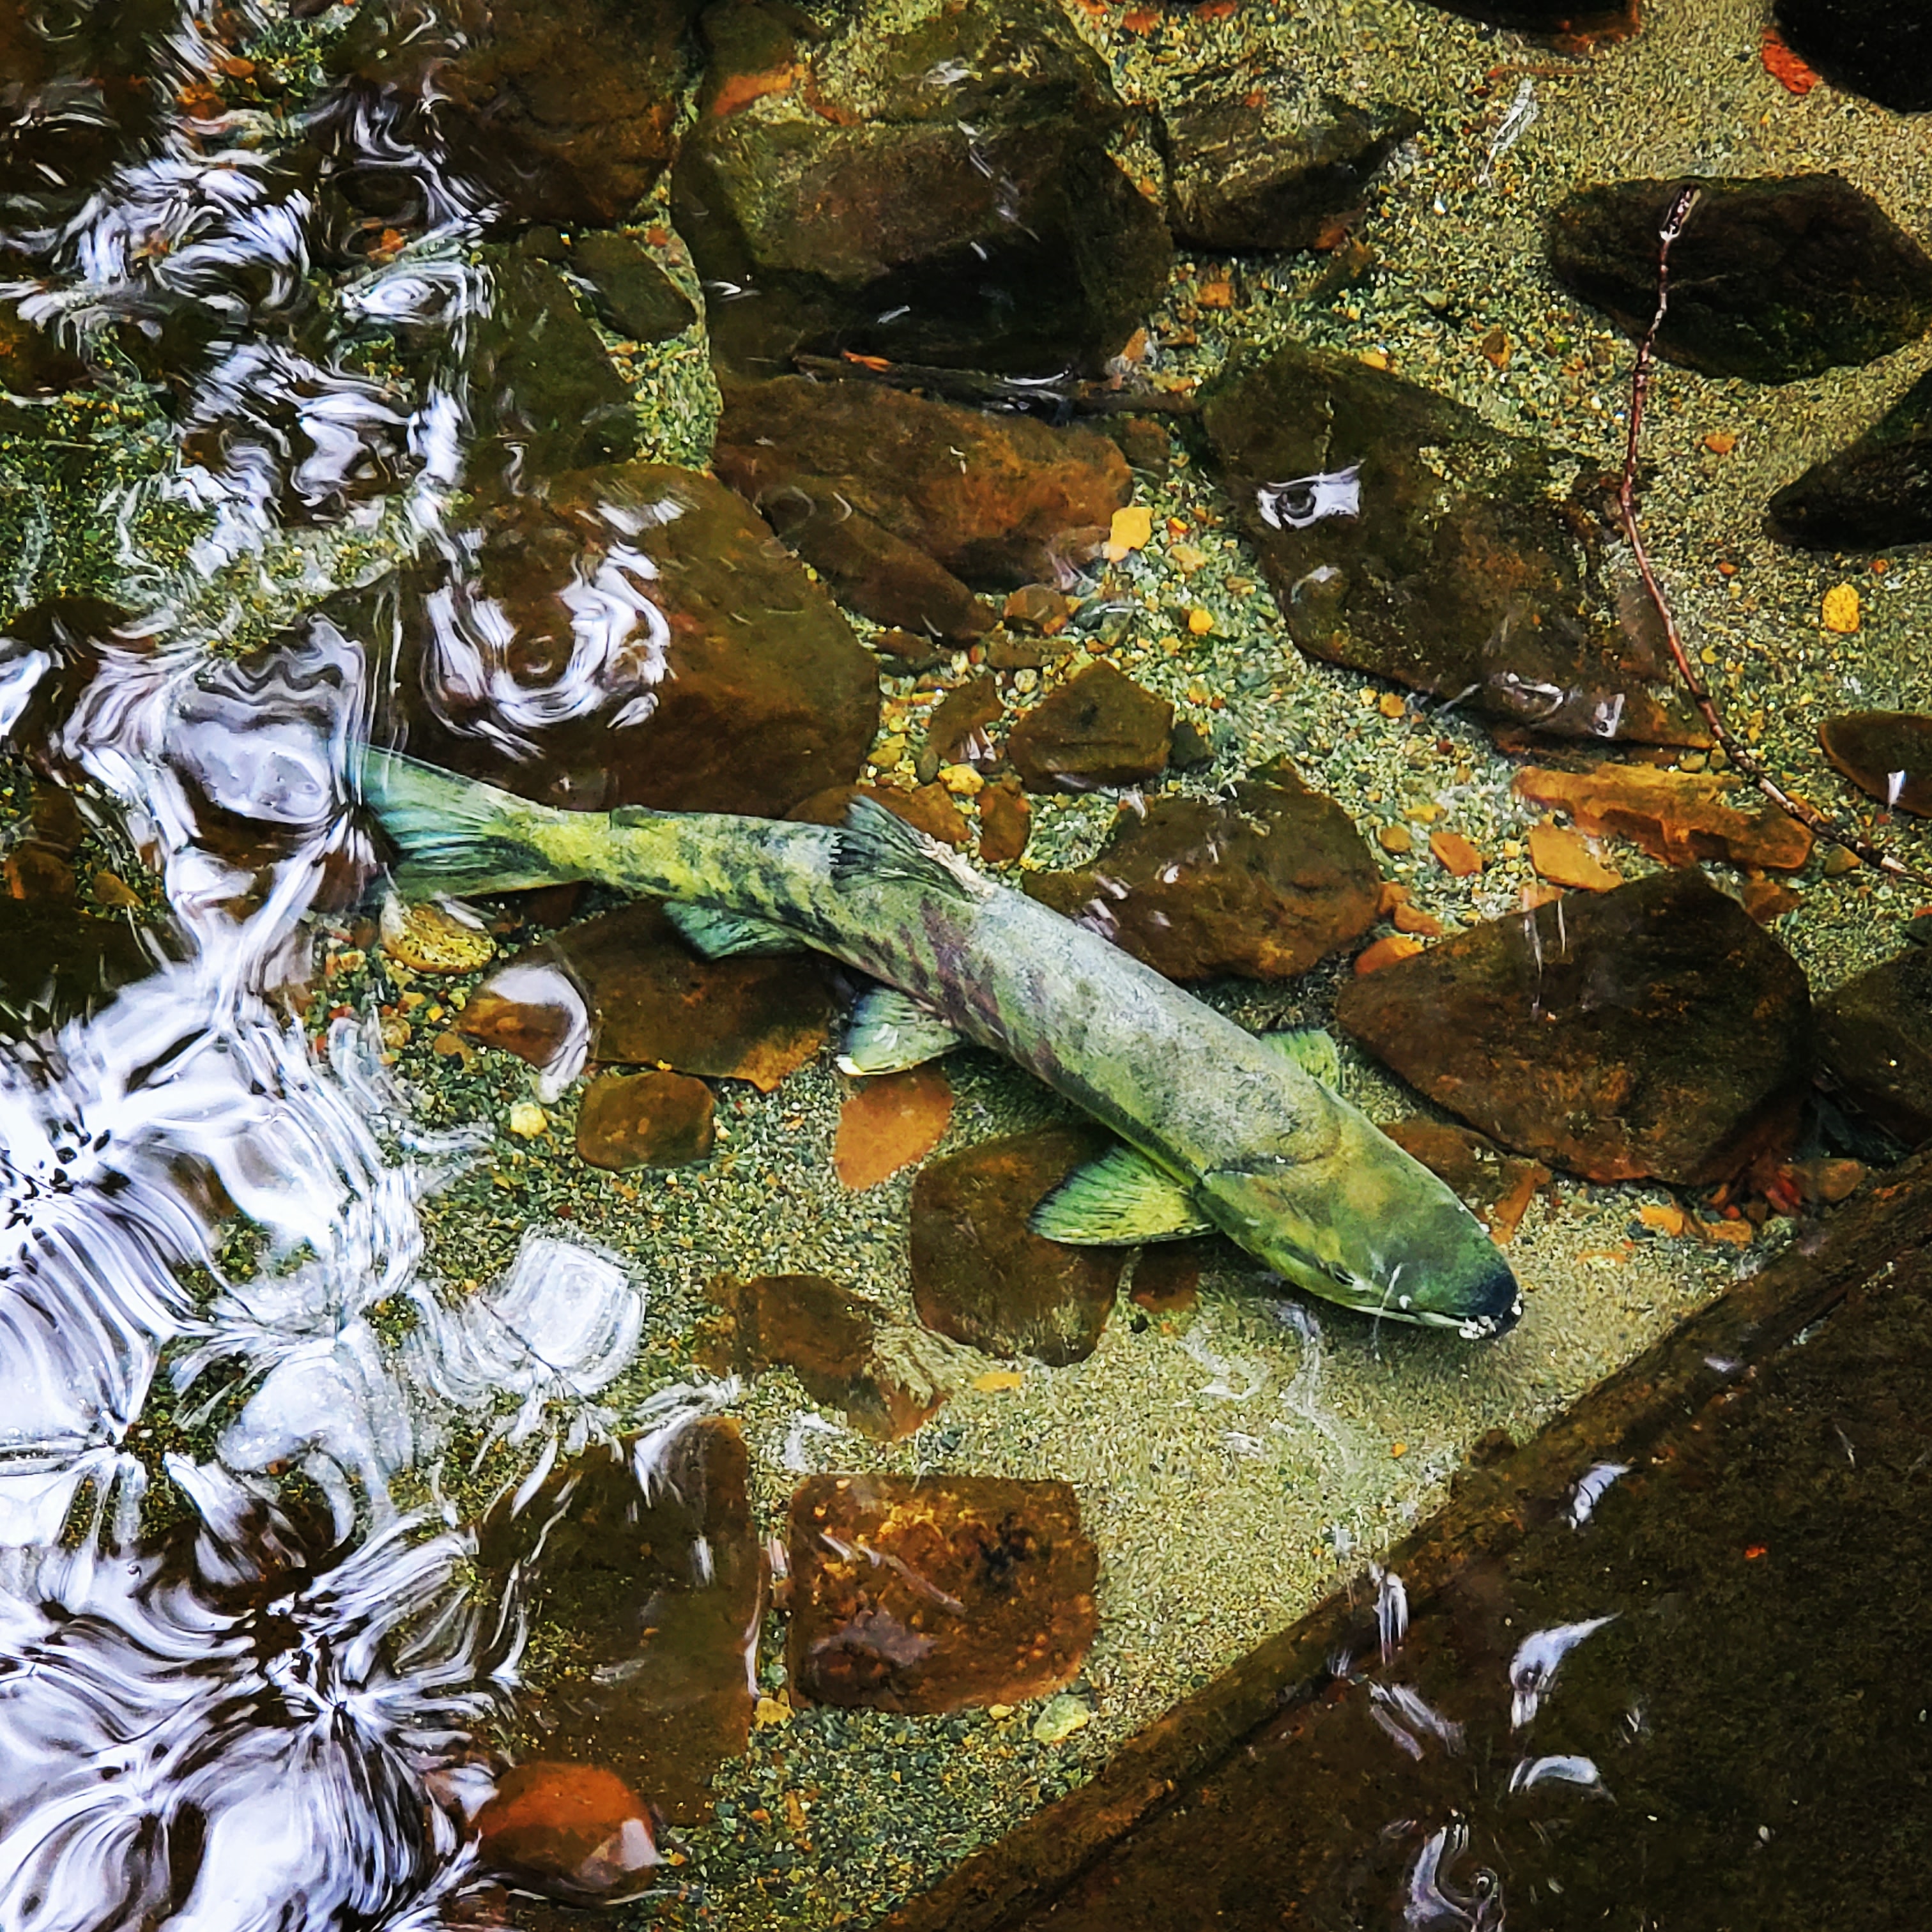 Volunteer group raises alarm after two fish killed in Port Coquitlam creek  - Tri-City News